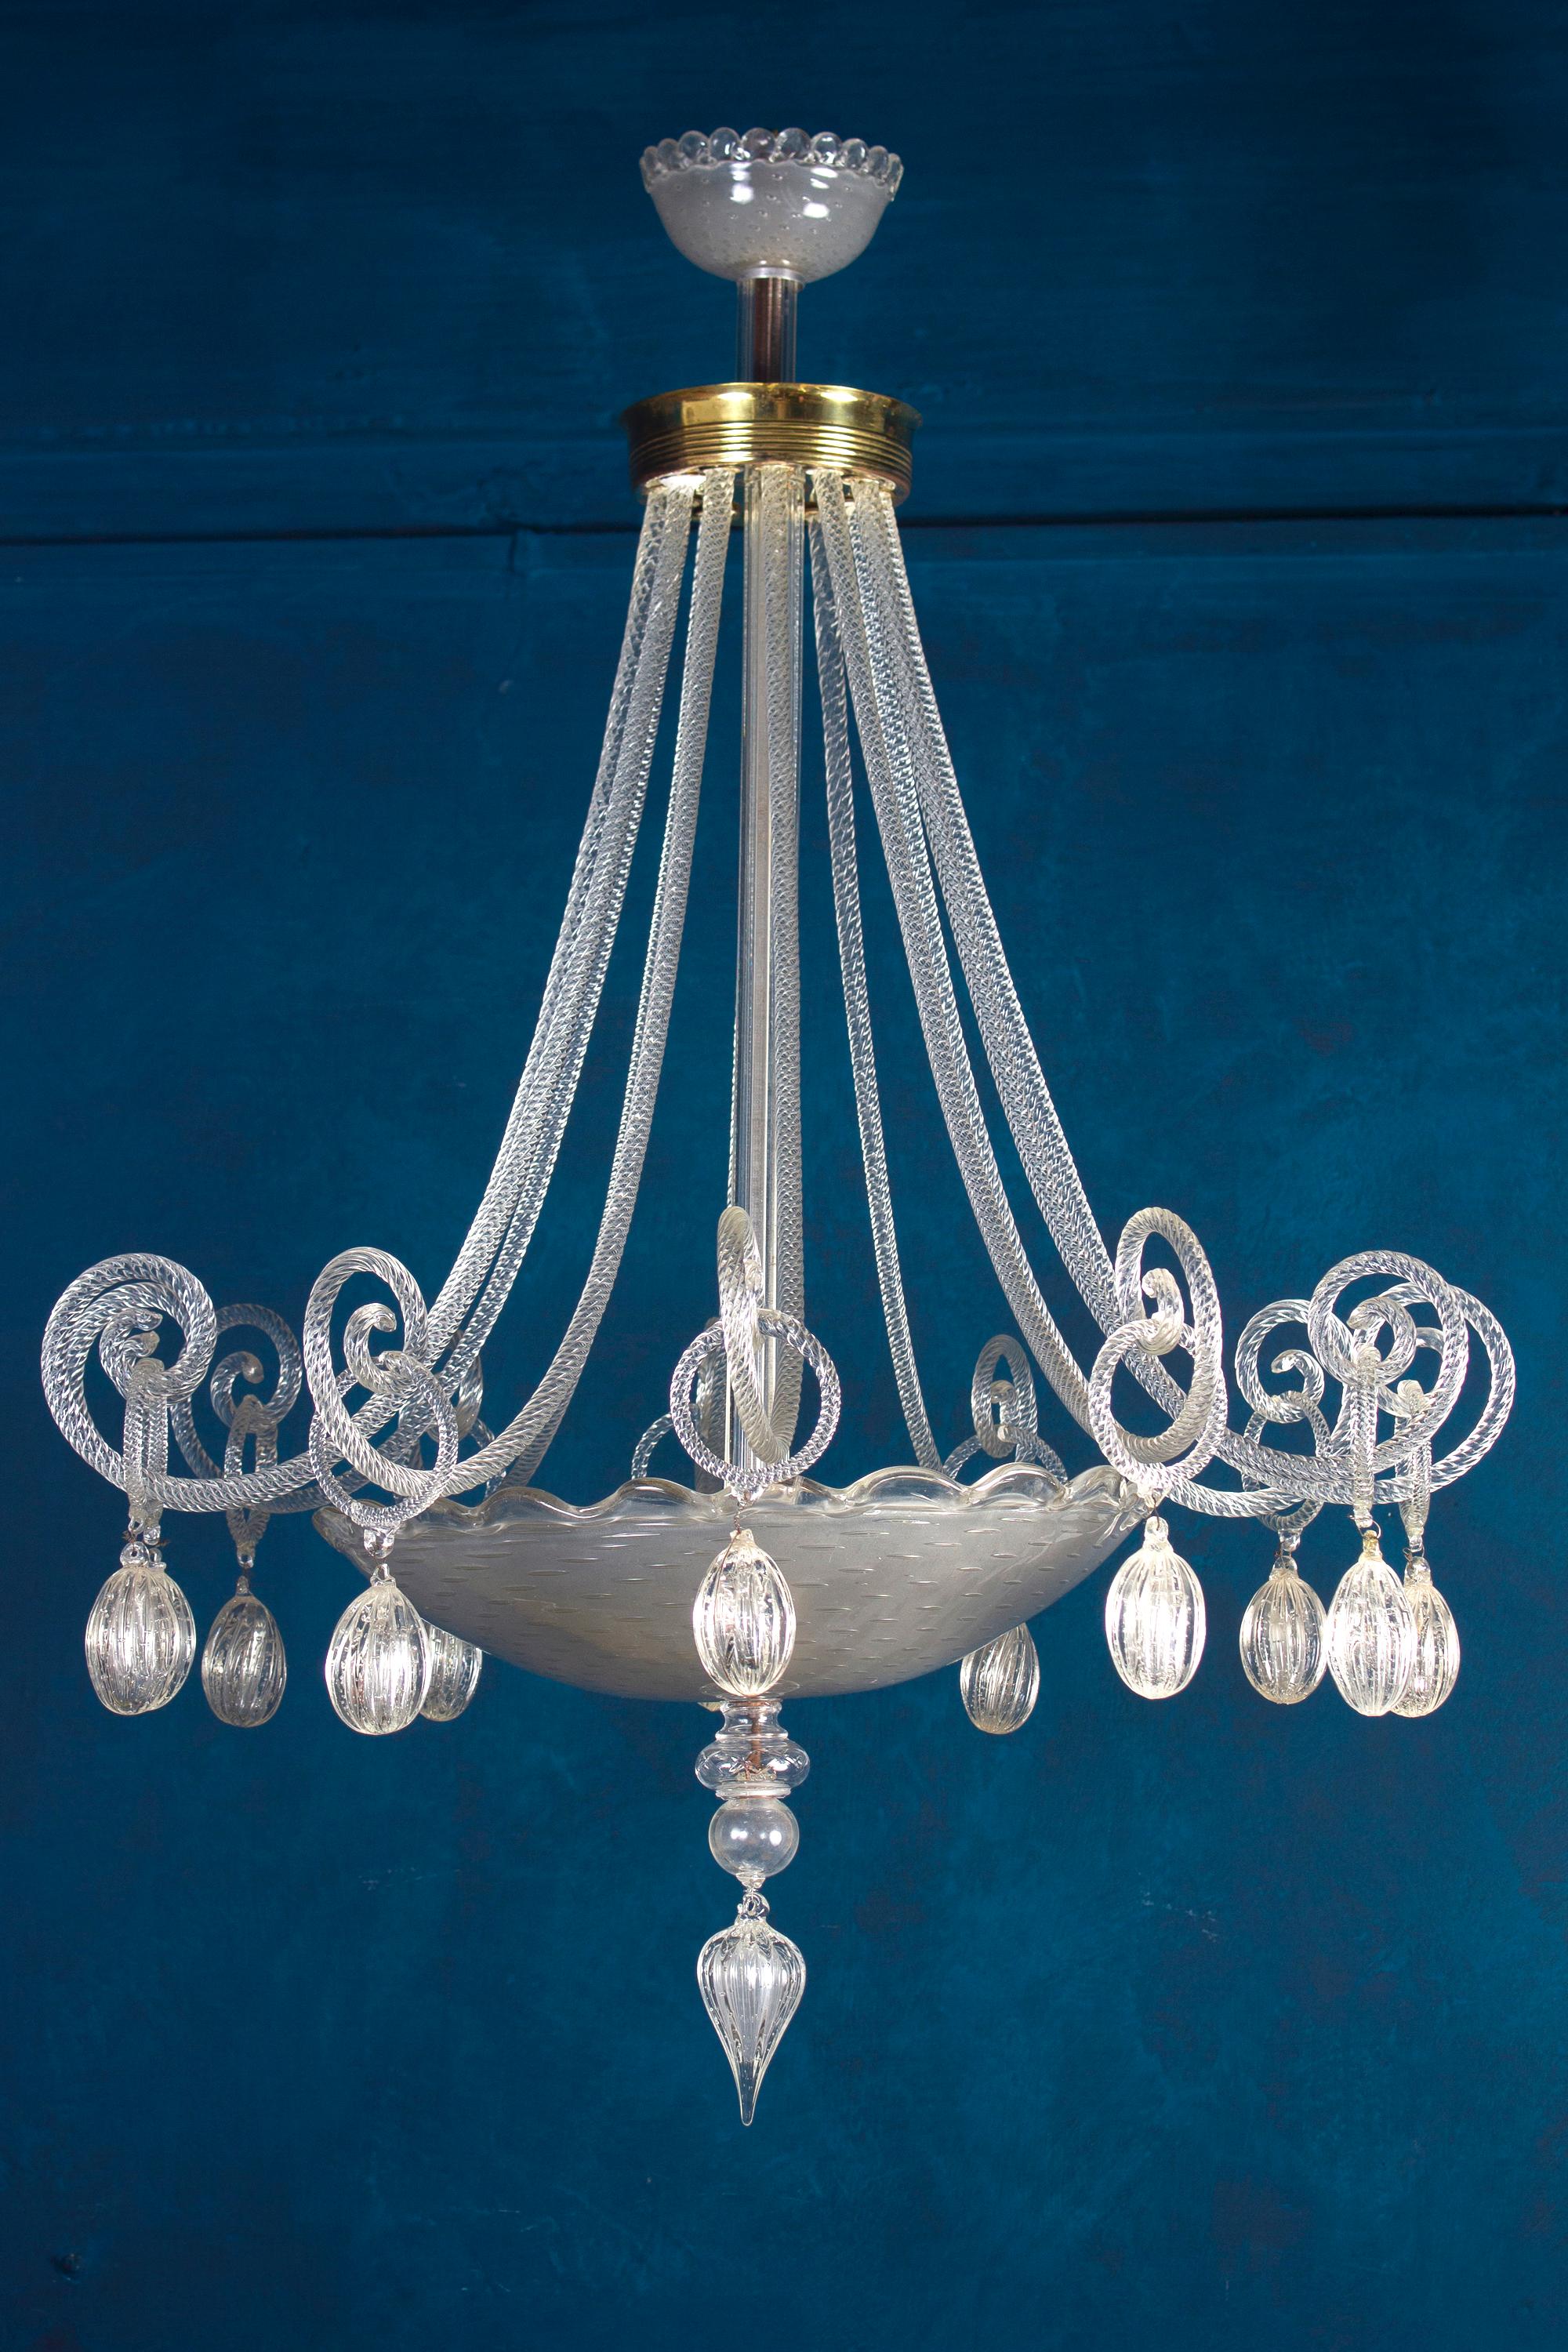 Elegant and rare Murano glass chandelier, made of precious hand blown clear glasses.
Cleaned and re-wired, in full working order and ready to use. In excellent vintage condition. This light fixture can be disassembled and the glasses individually